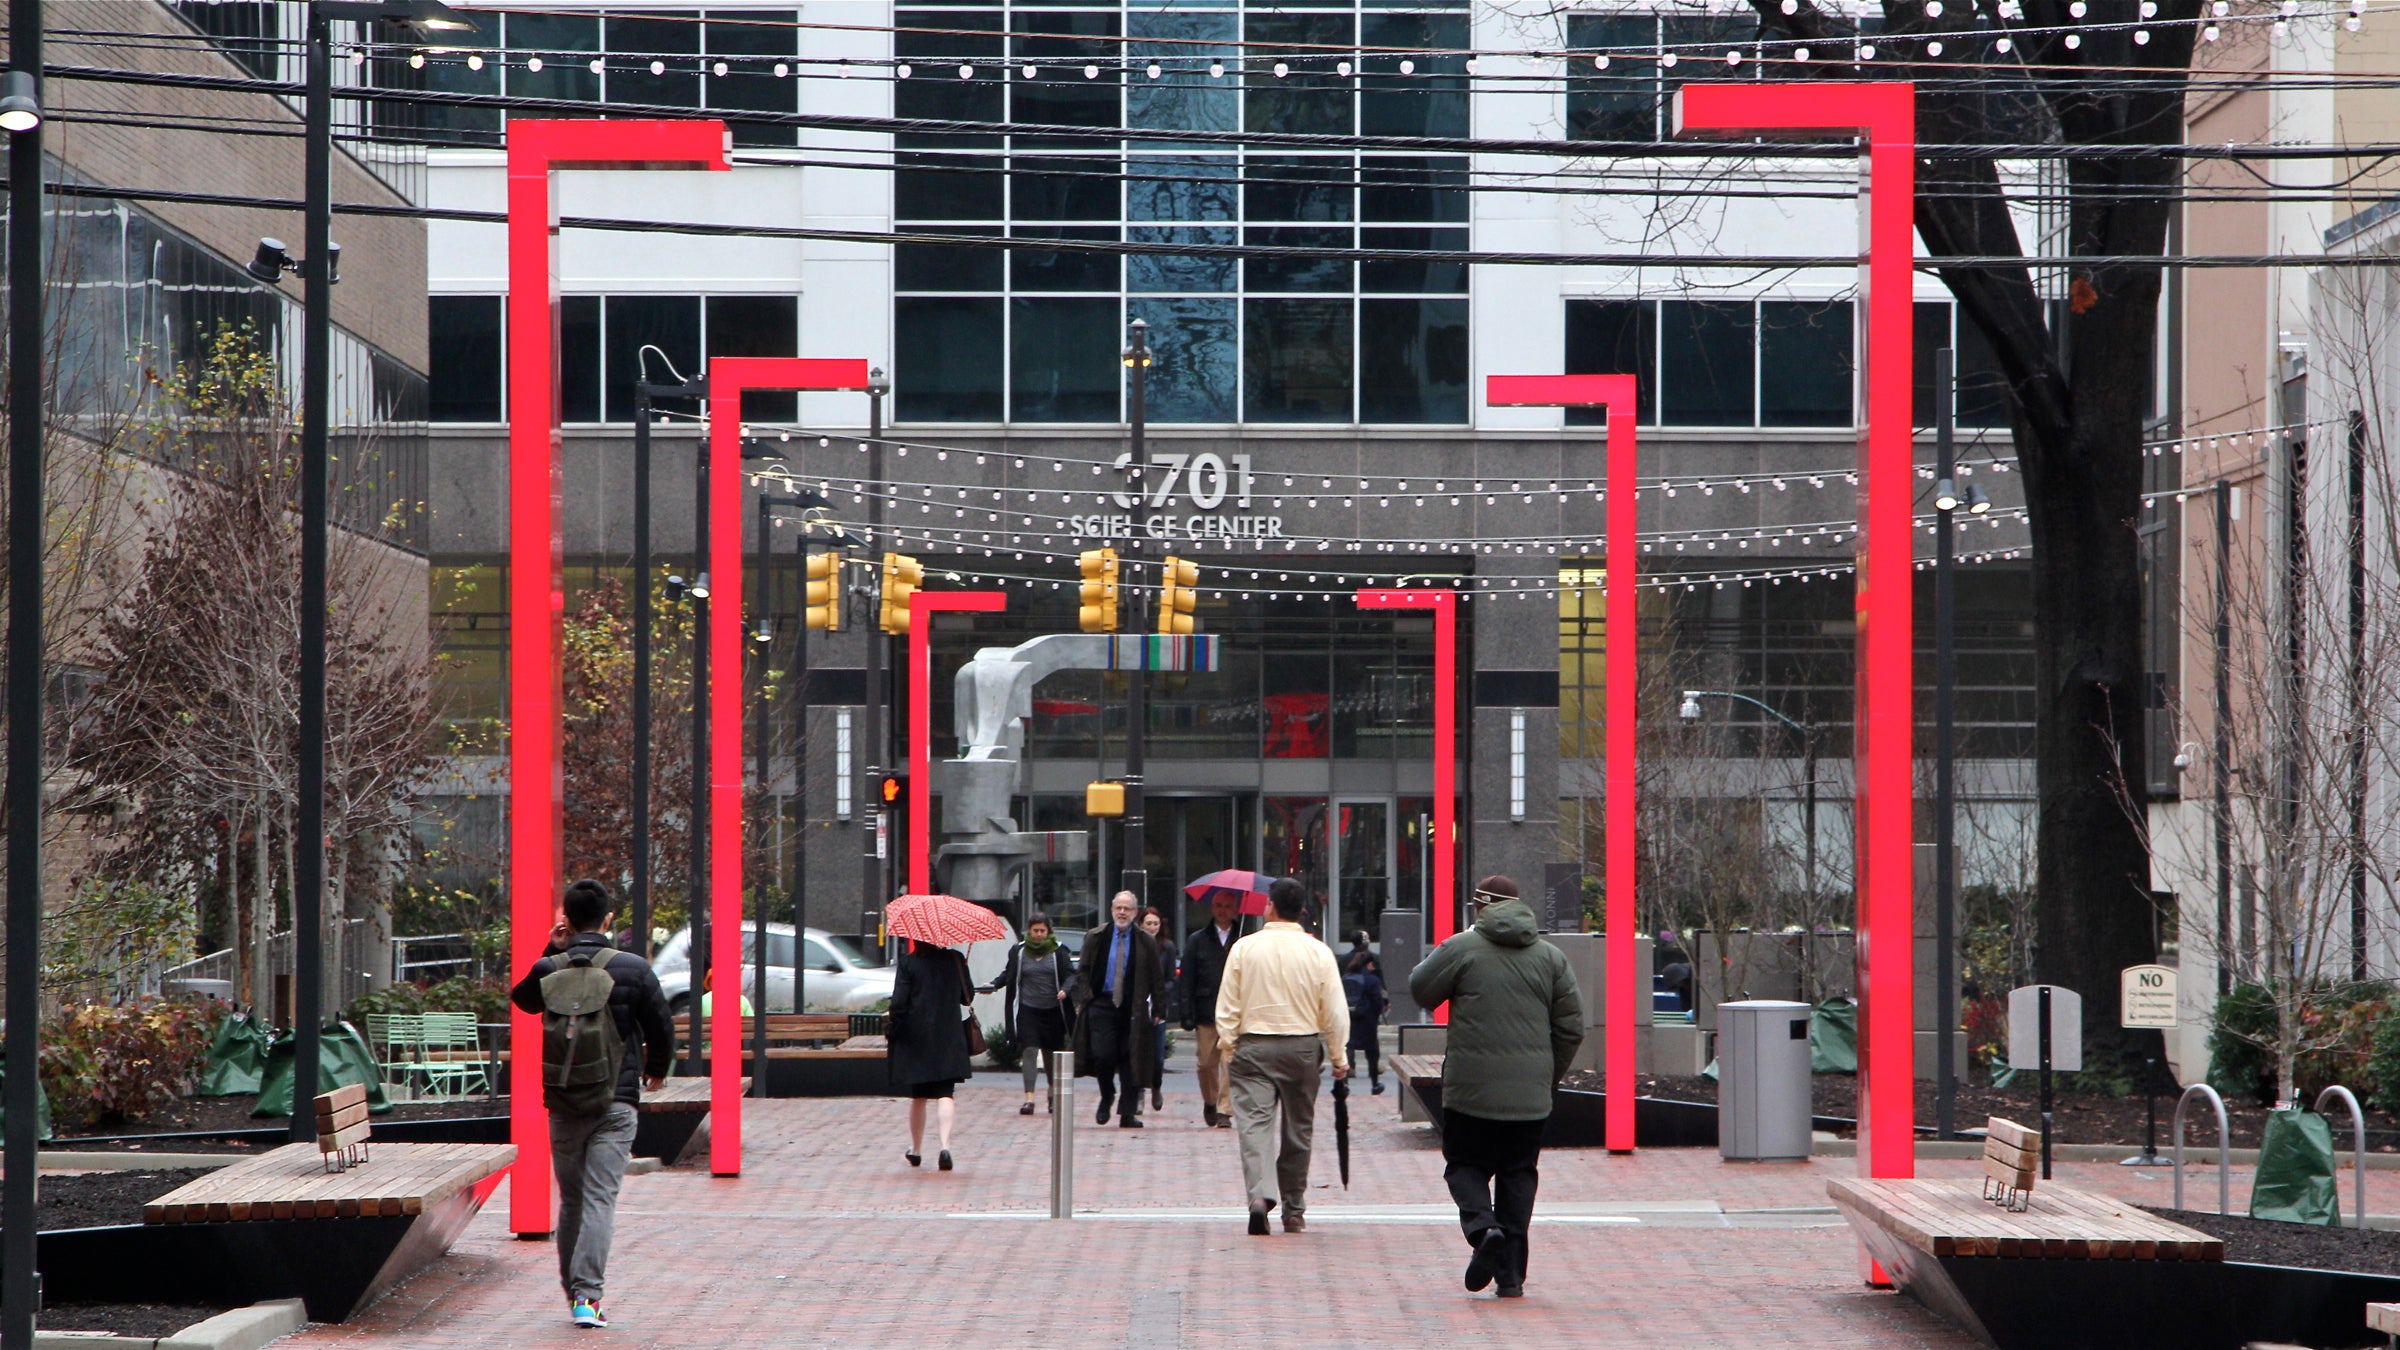  Innovation Plaza occupies two blocks of 37th Street in University City. (Emma Lee/WHYY) 